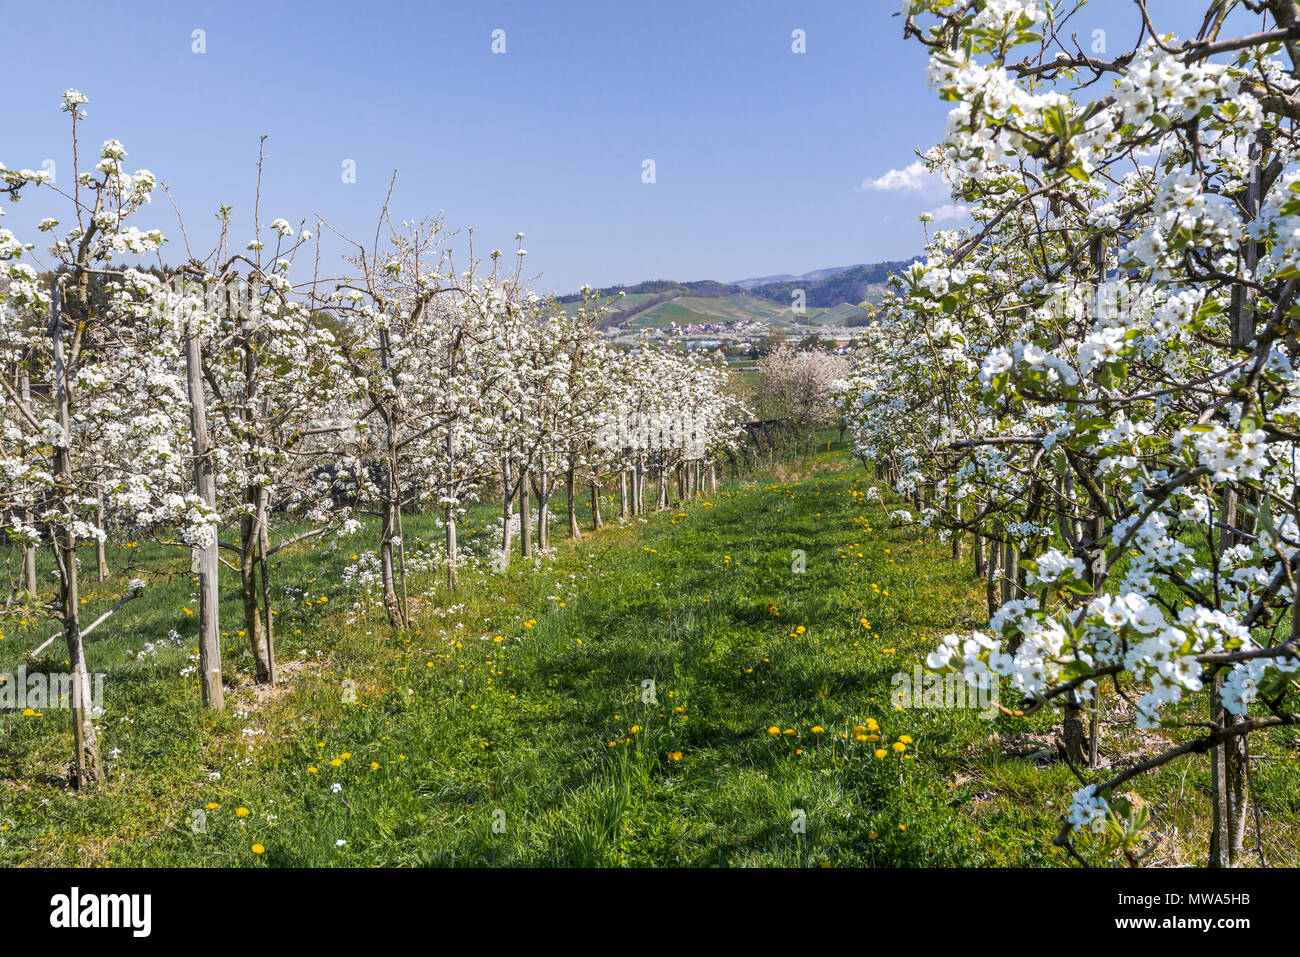 orchard with blooming cherry trees near Oberkirch, Germany, cultural landscape at the foothills of the Black Forest at springtime Stock Photo